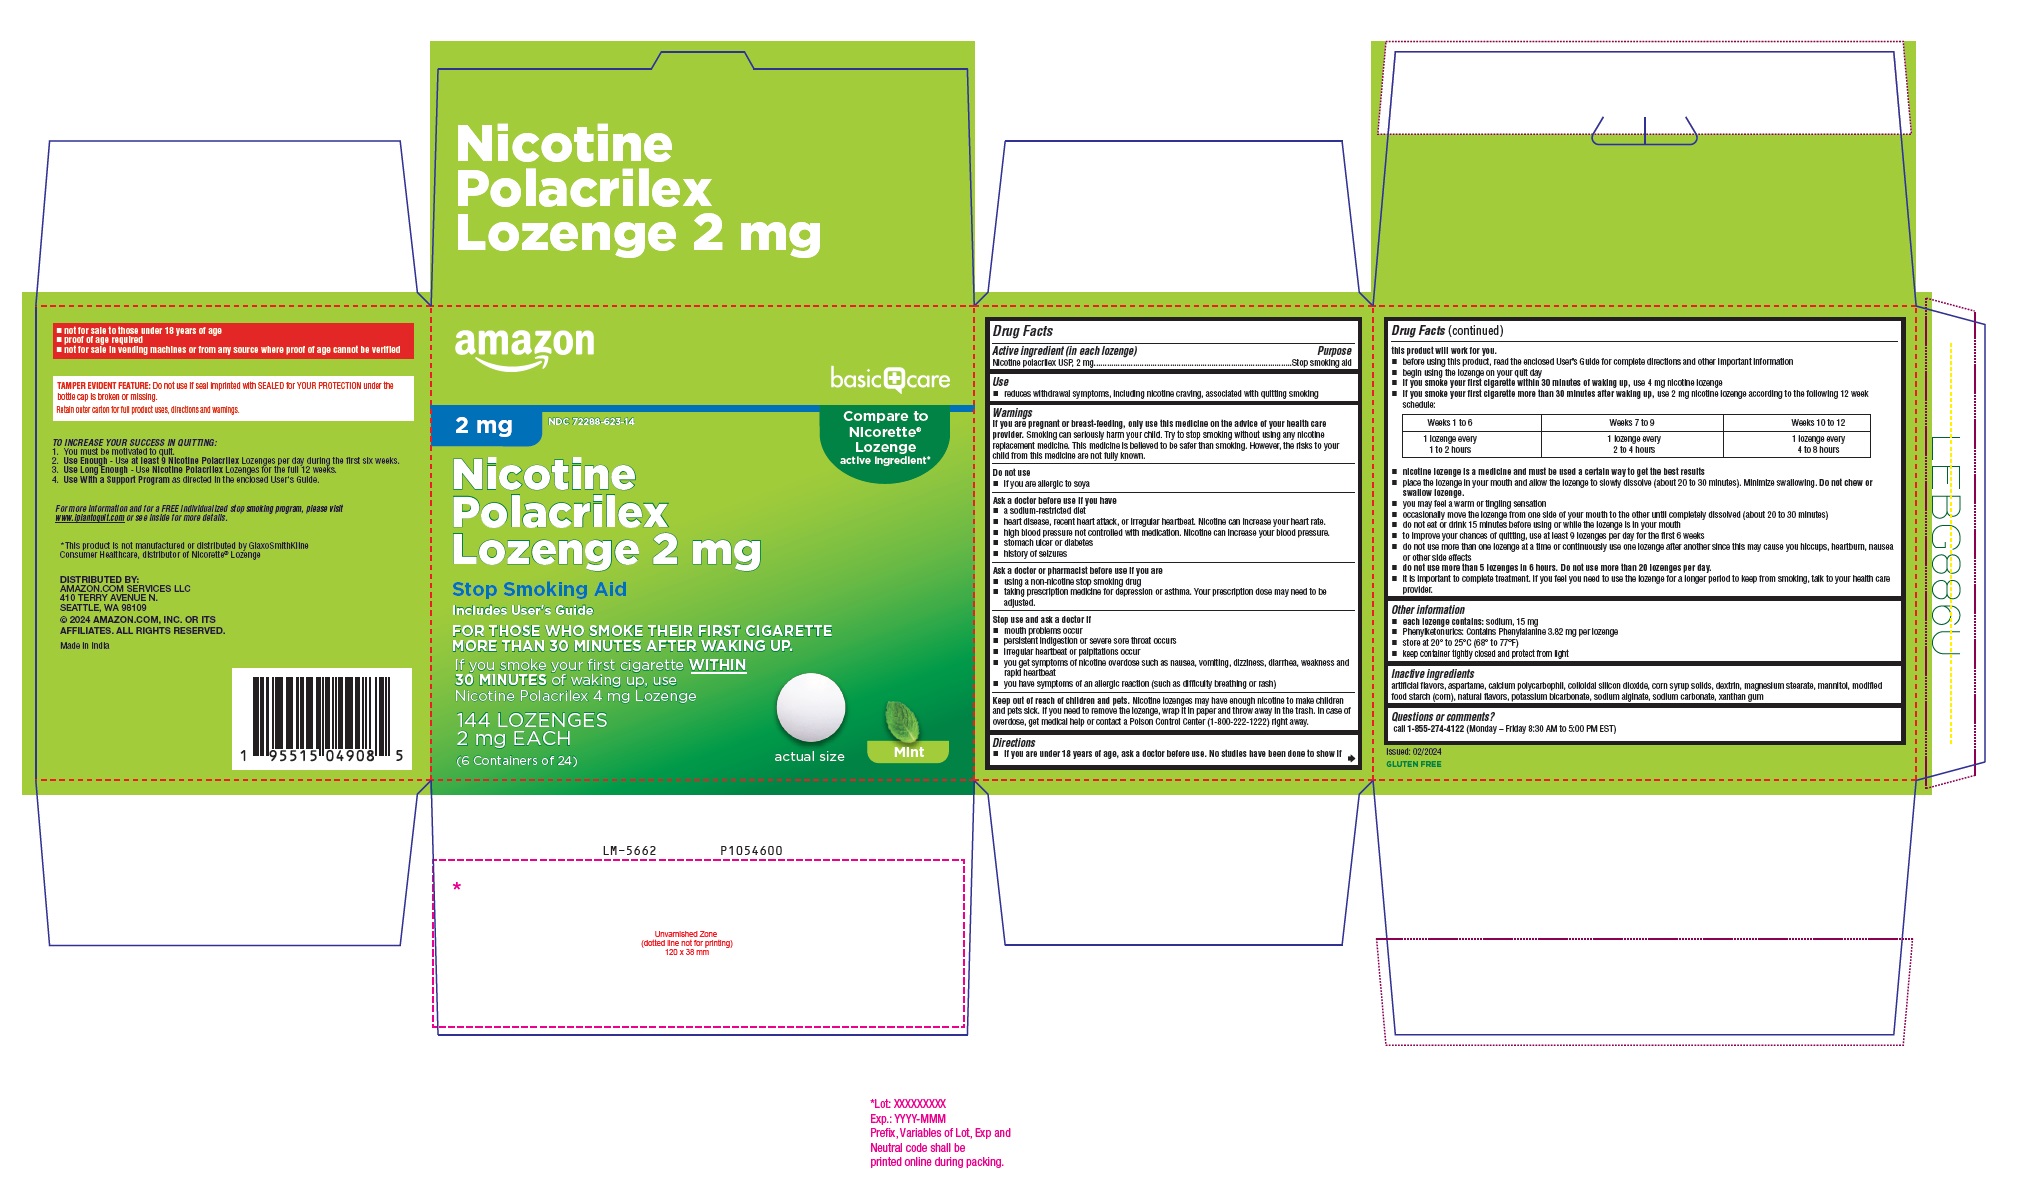 PACKAGE LABEL-PRINCIPAL DISPLAY PANEL - 2 mg (144 Lozenges, Container Carton Label)